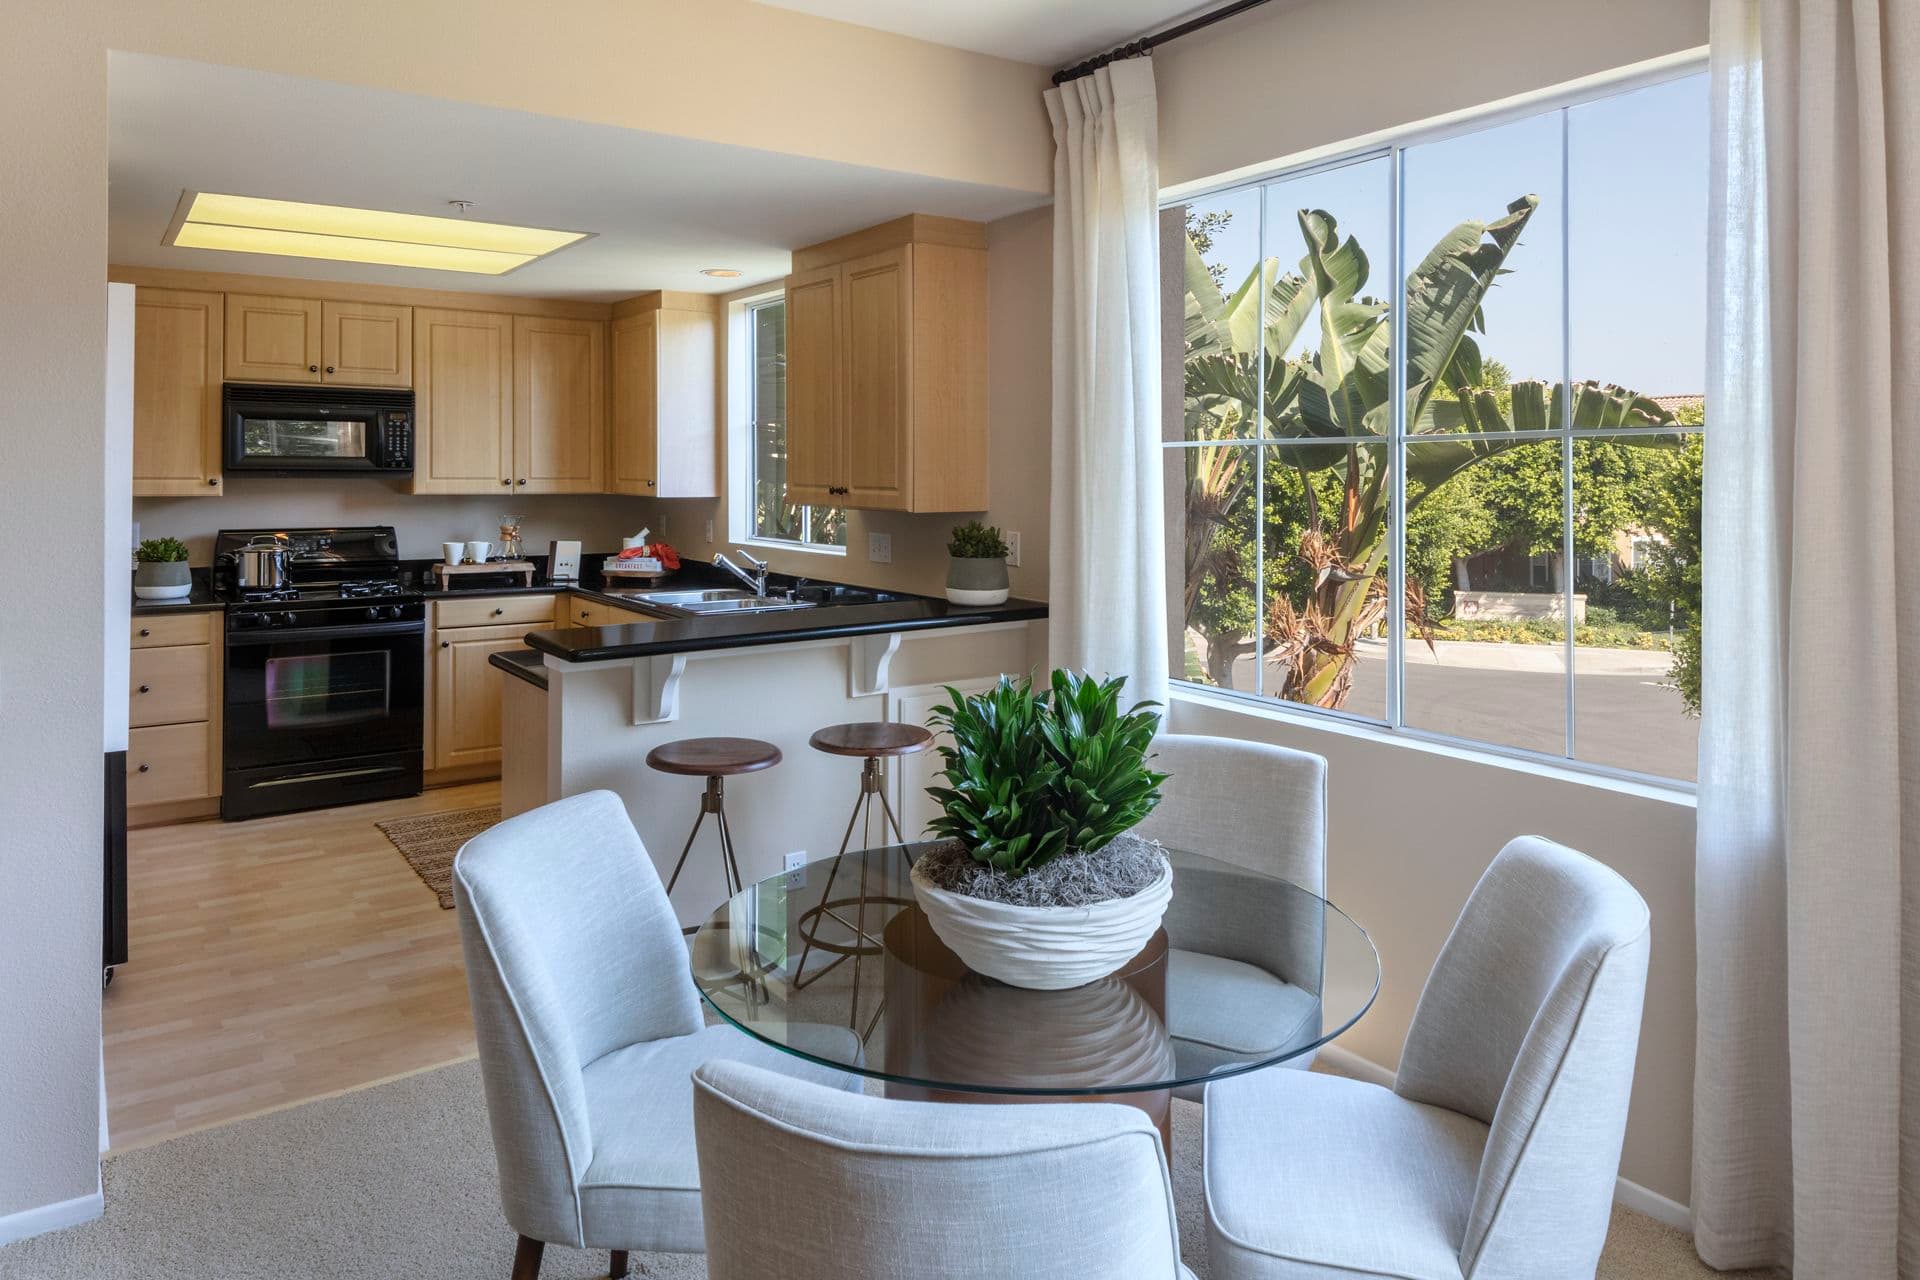 Interior view of kitchen and dining room at Santa Clara Apartment Homes in Irvine, CA.